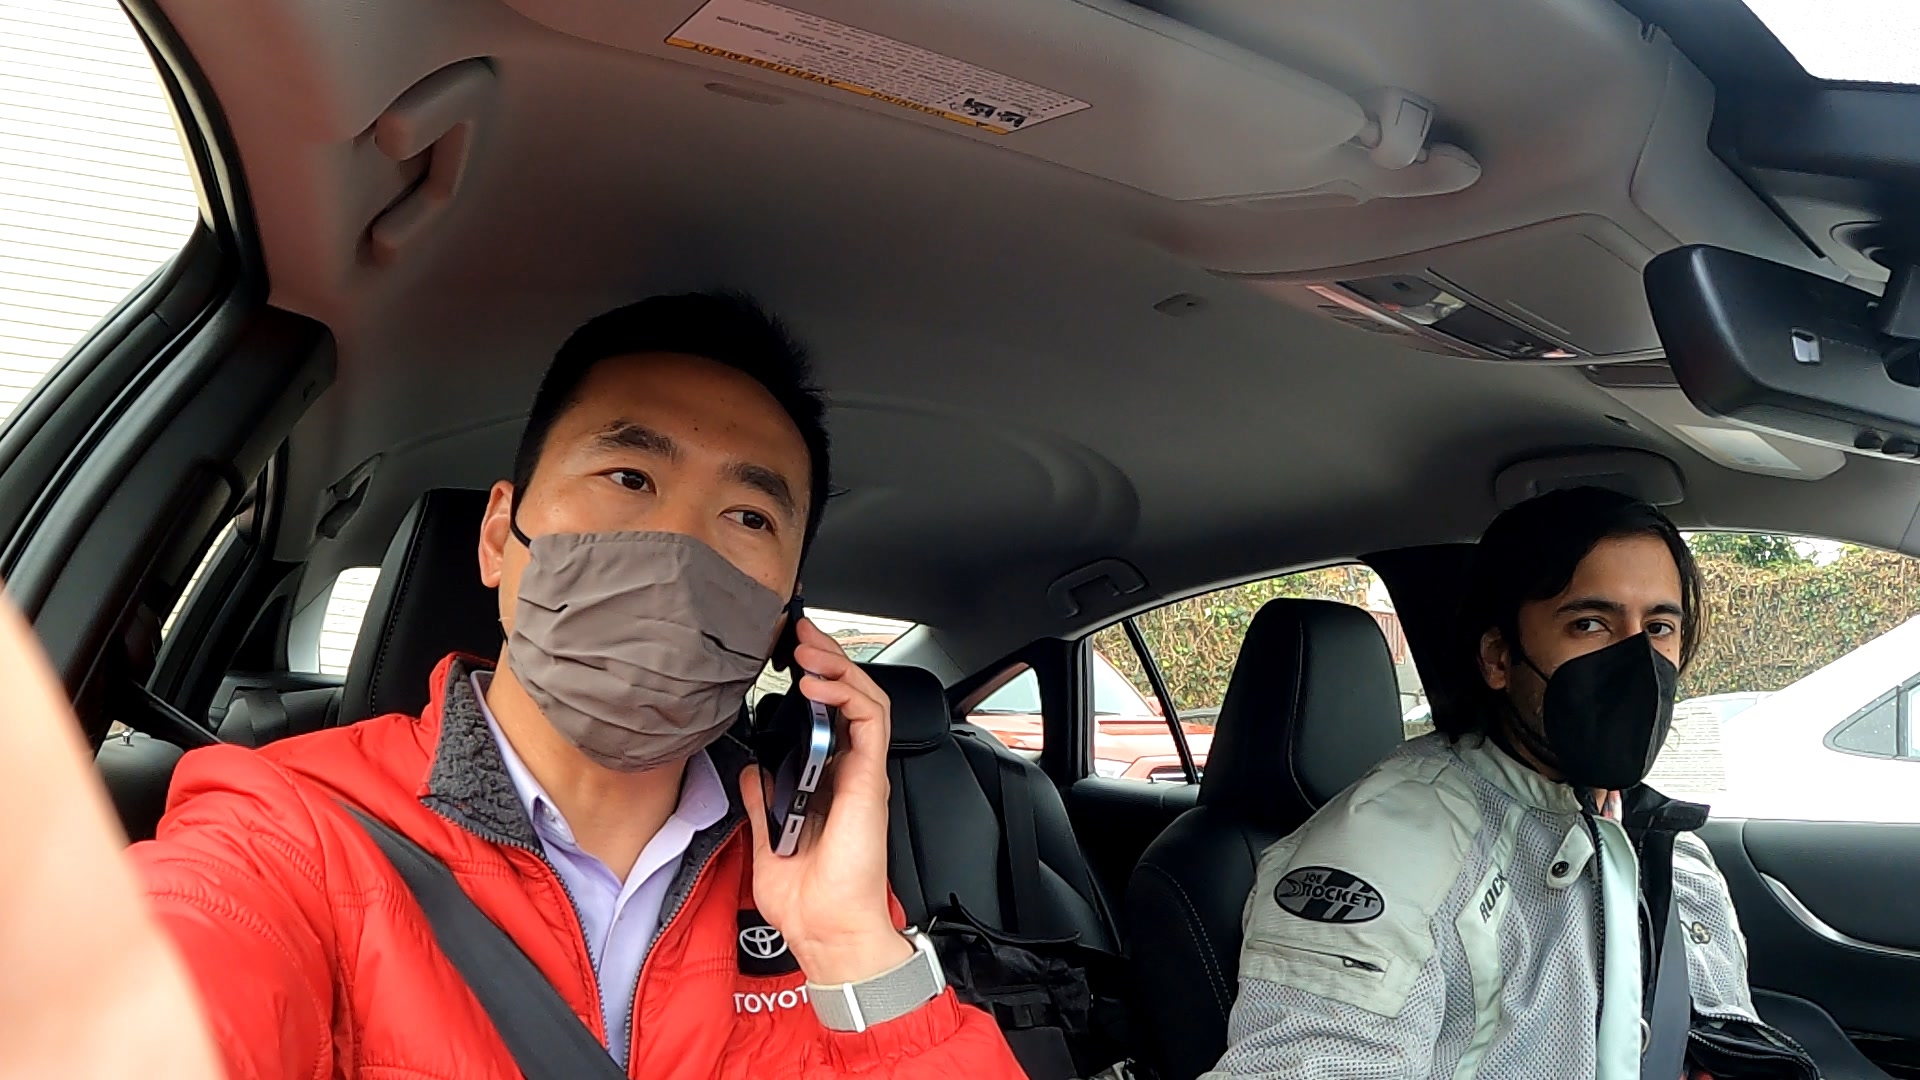 a selfie taken by a toyota representative in the passenger seat wearing a red toyota jacket and a man in the drivers seat, both wearing masks looking at the camera